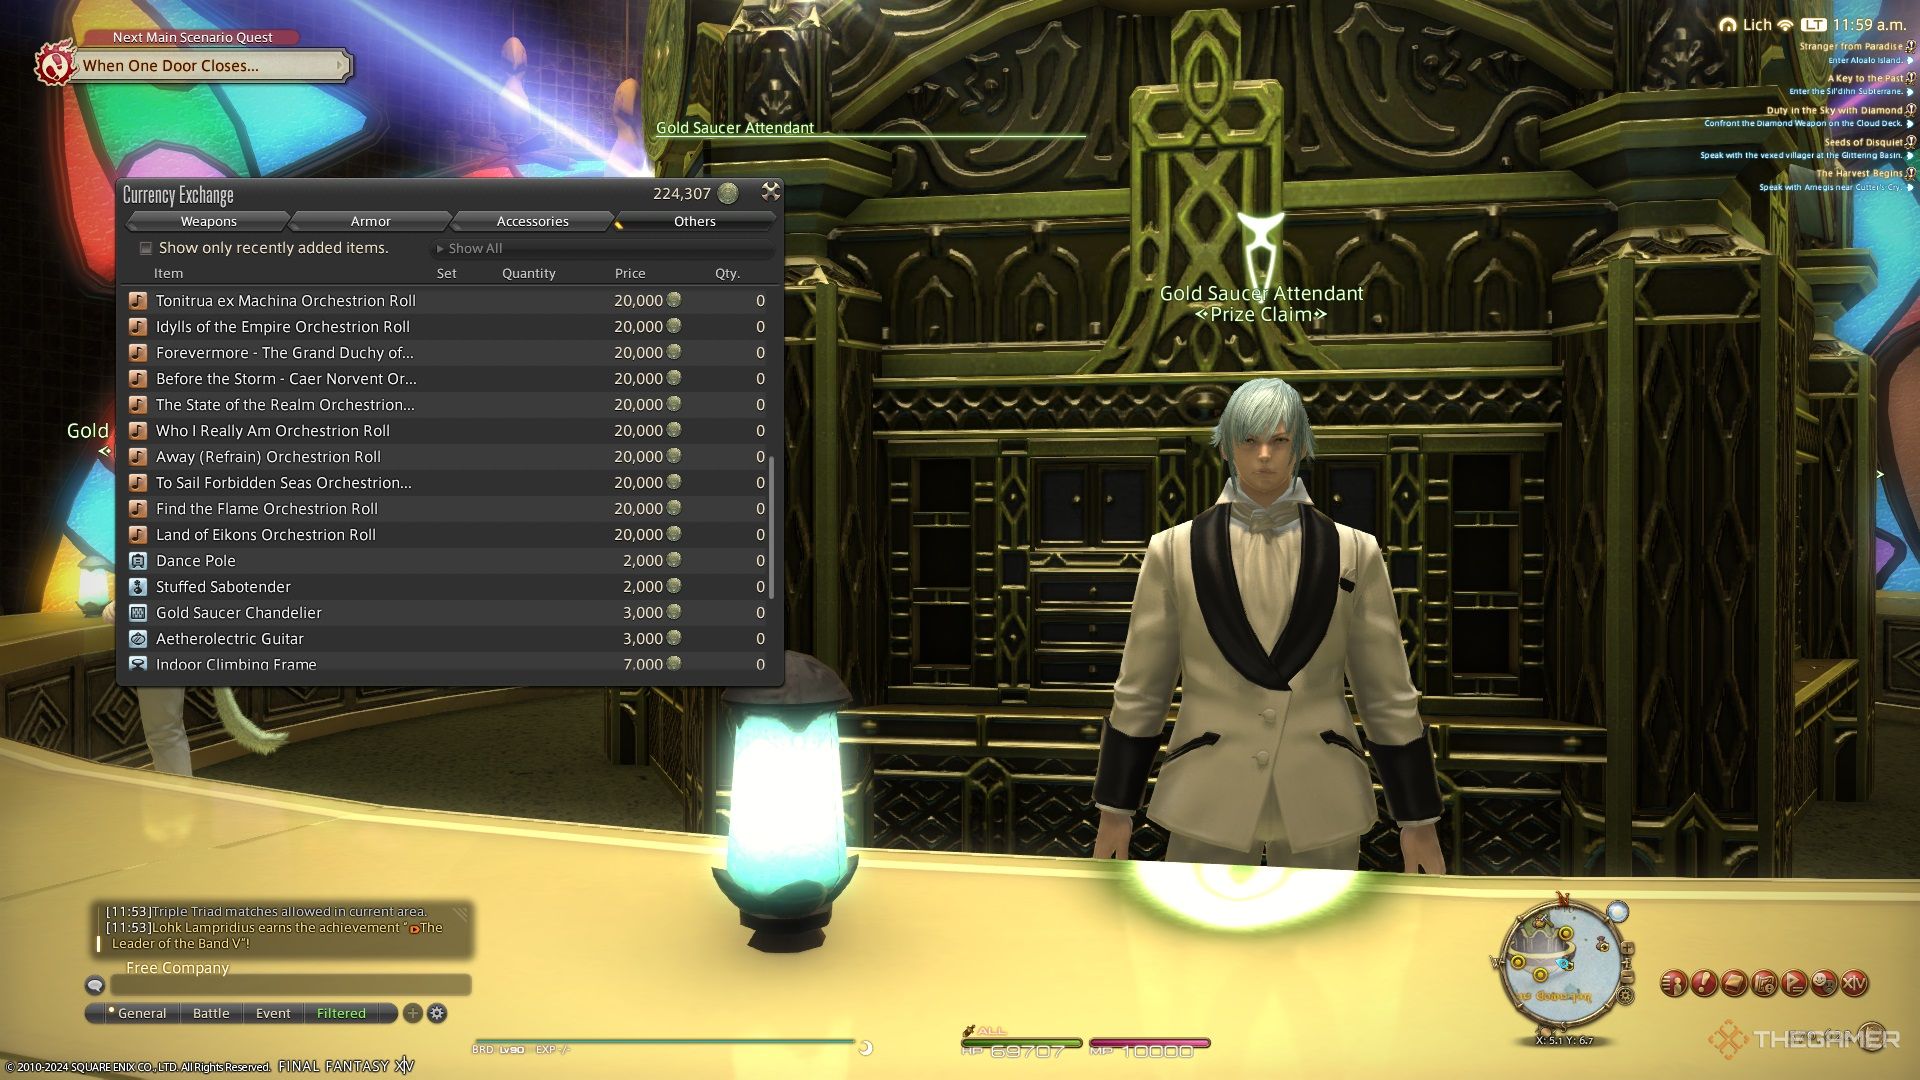 The Gold Saucer Attendant selling the Final Fantasy 15 Orchestrions Rolls in Final Fantasy 14.